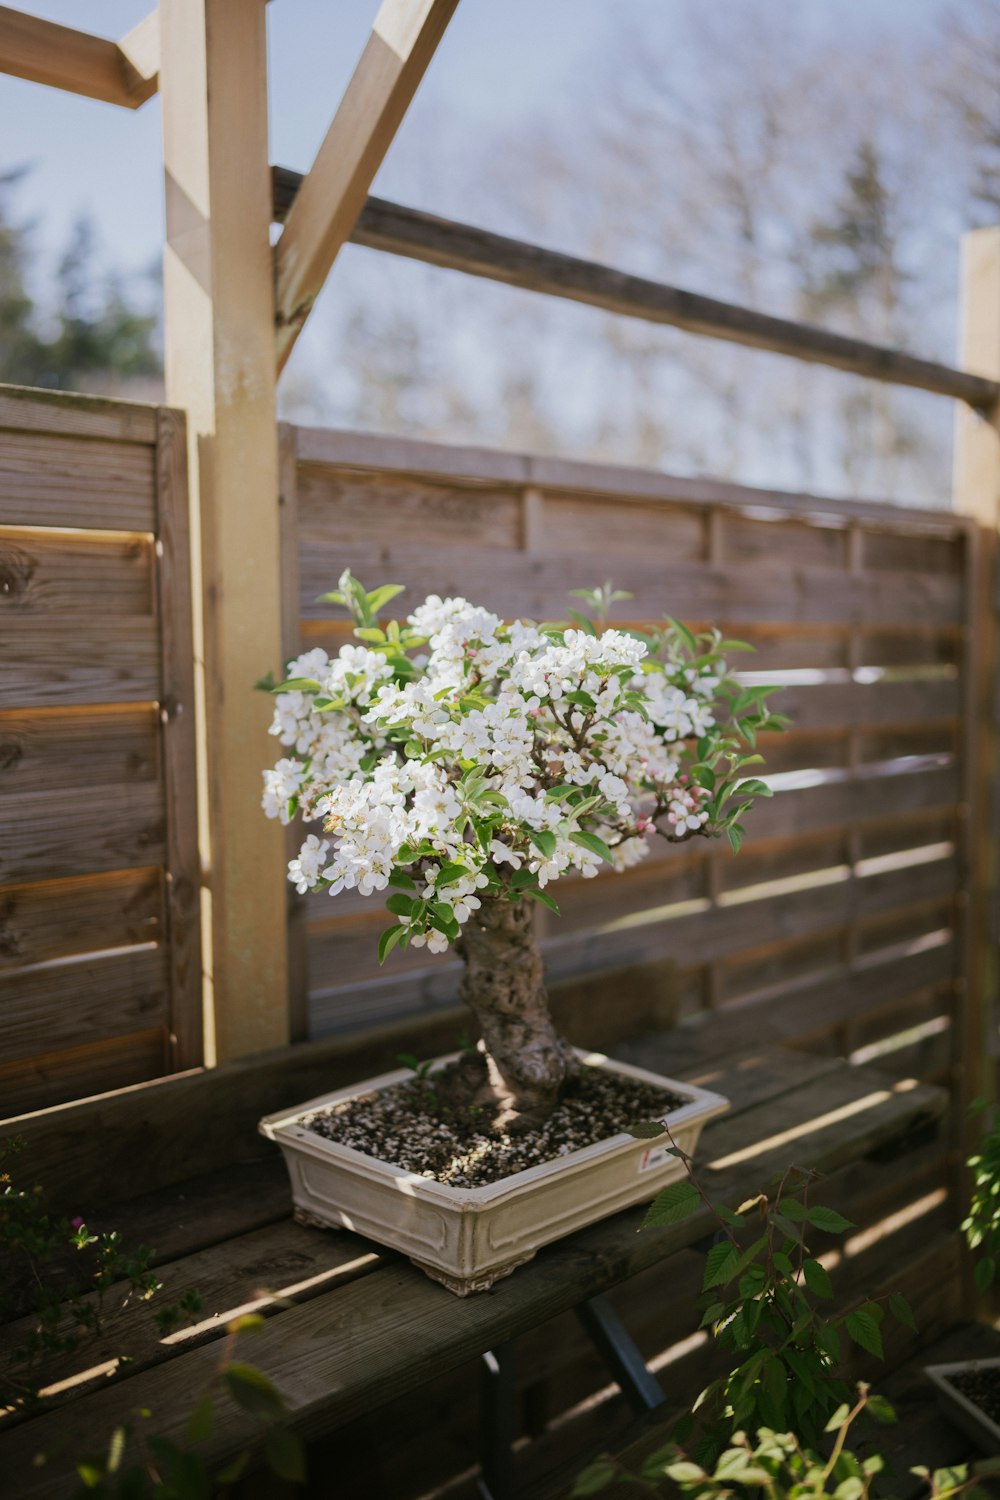 a bonsai tree with white flowers in a pot